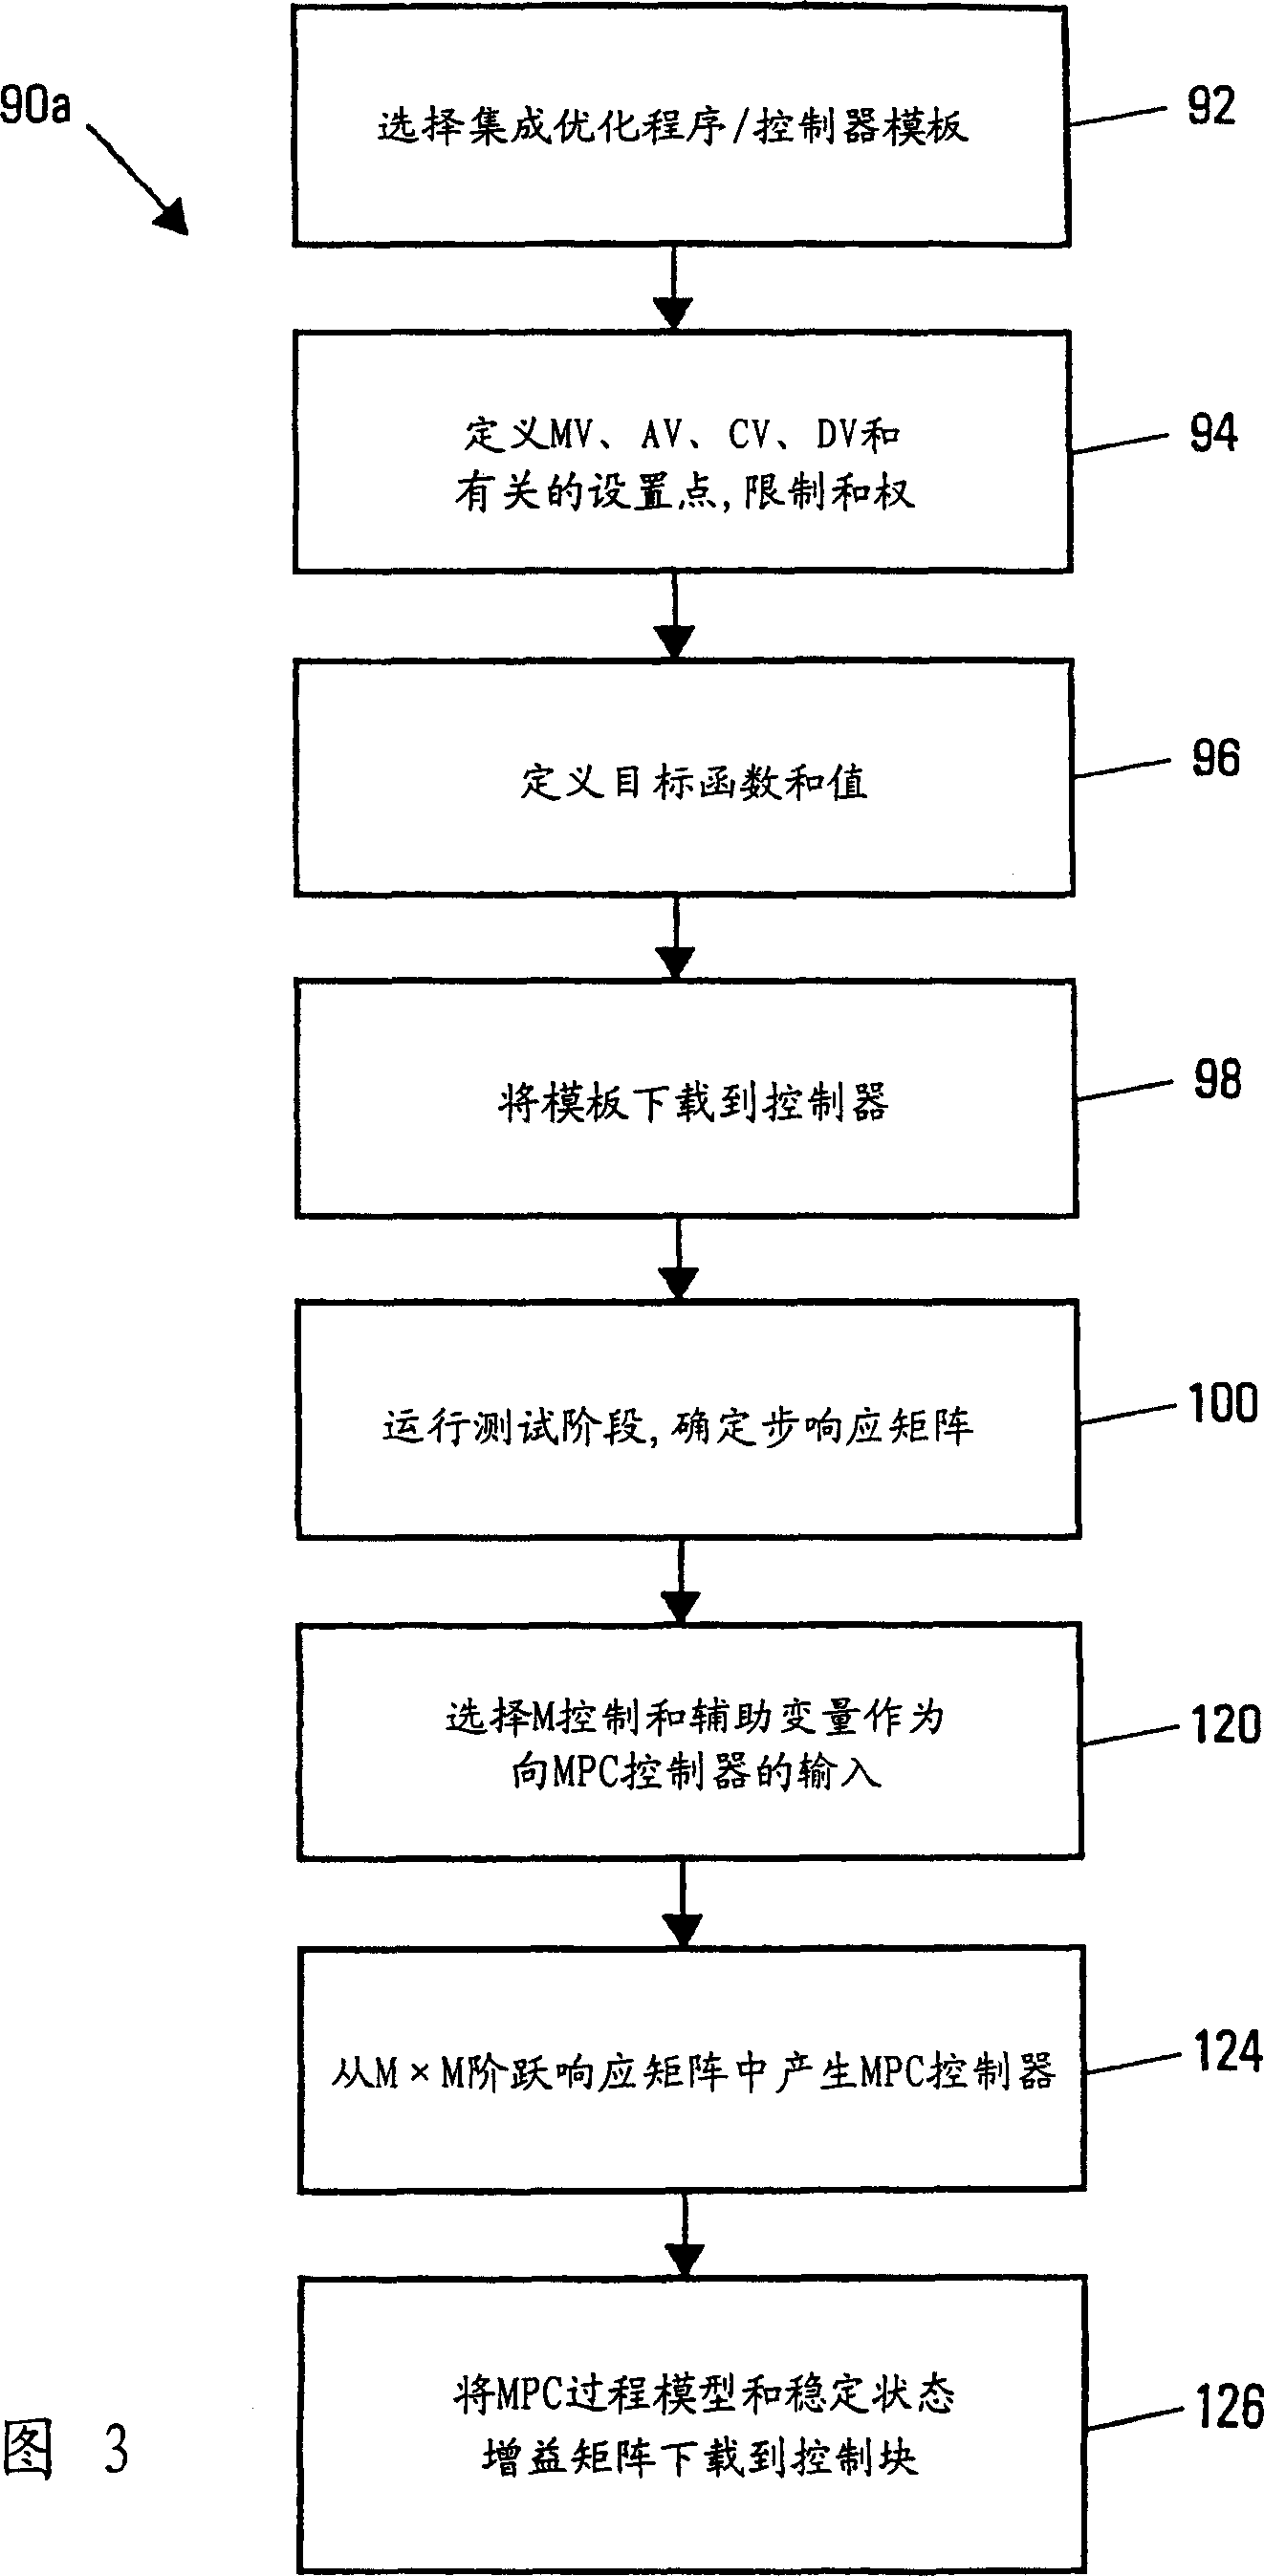 Constraint and limit feasibility process in process control system optimizer procedure